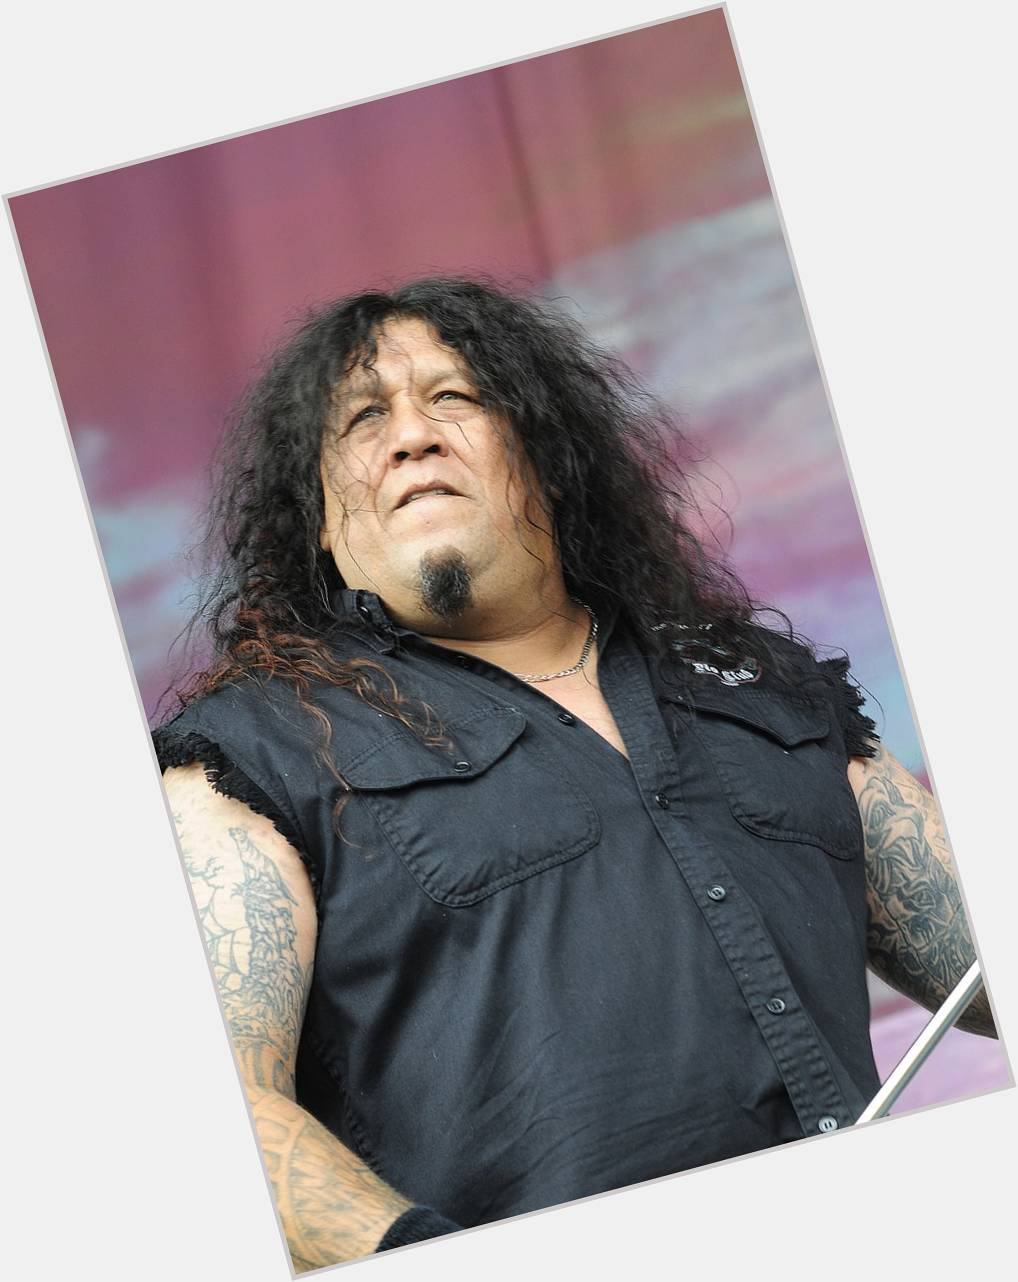 <a href="/hot-men/chuck-billy/is-he-native-american-married-why-so-fat">Chuck Billy</a>  